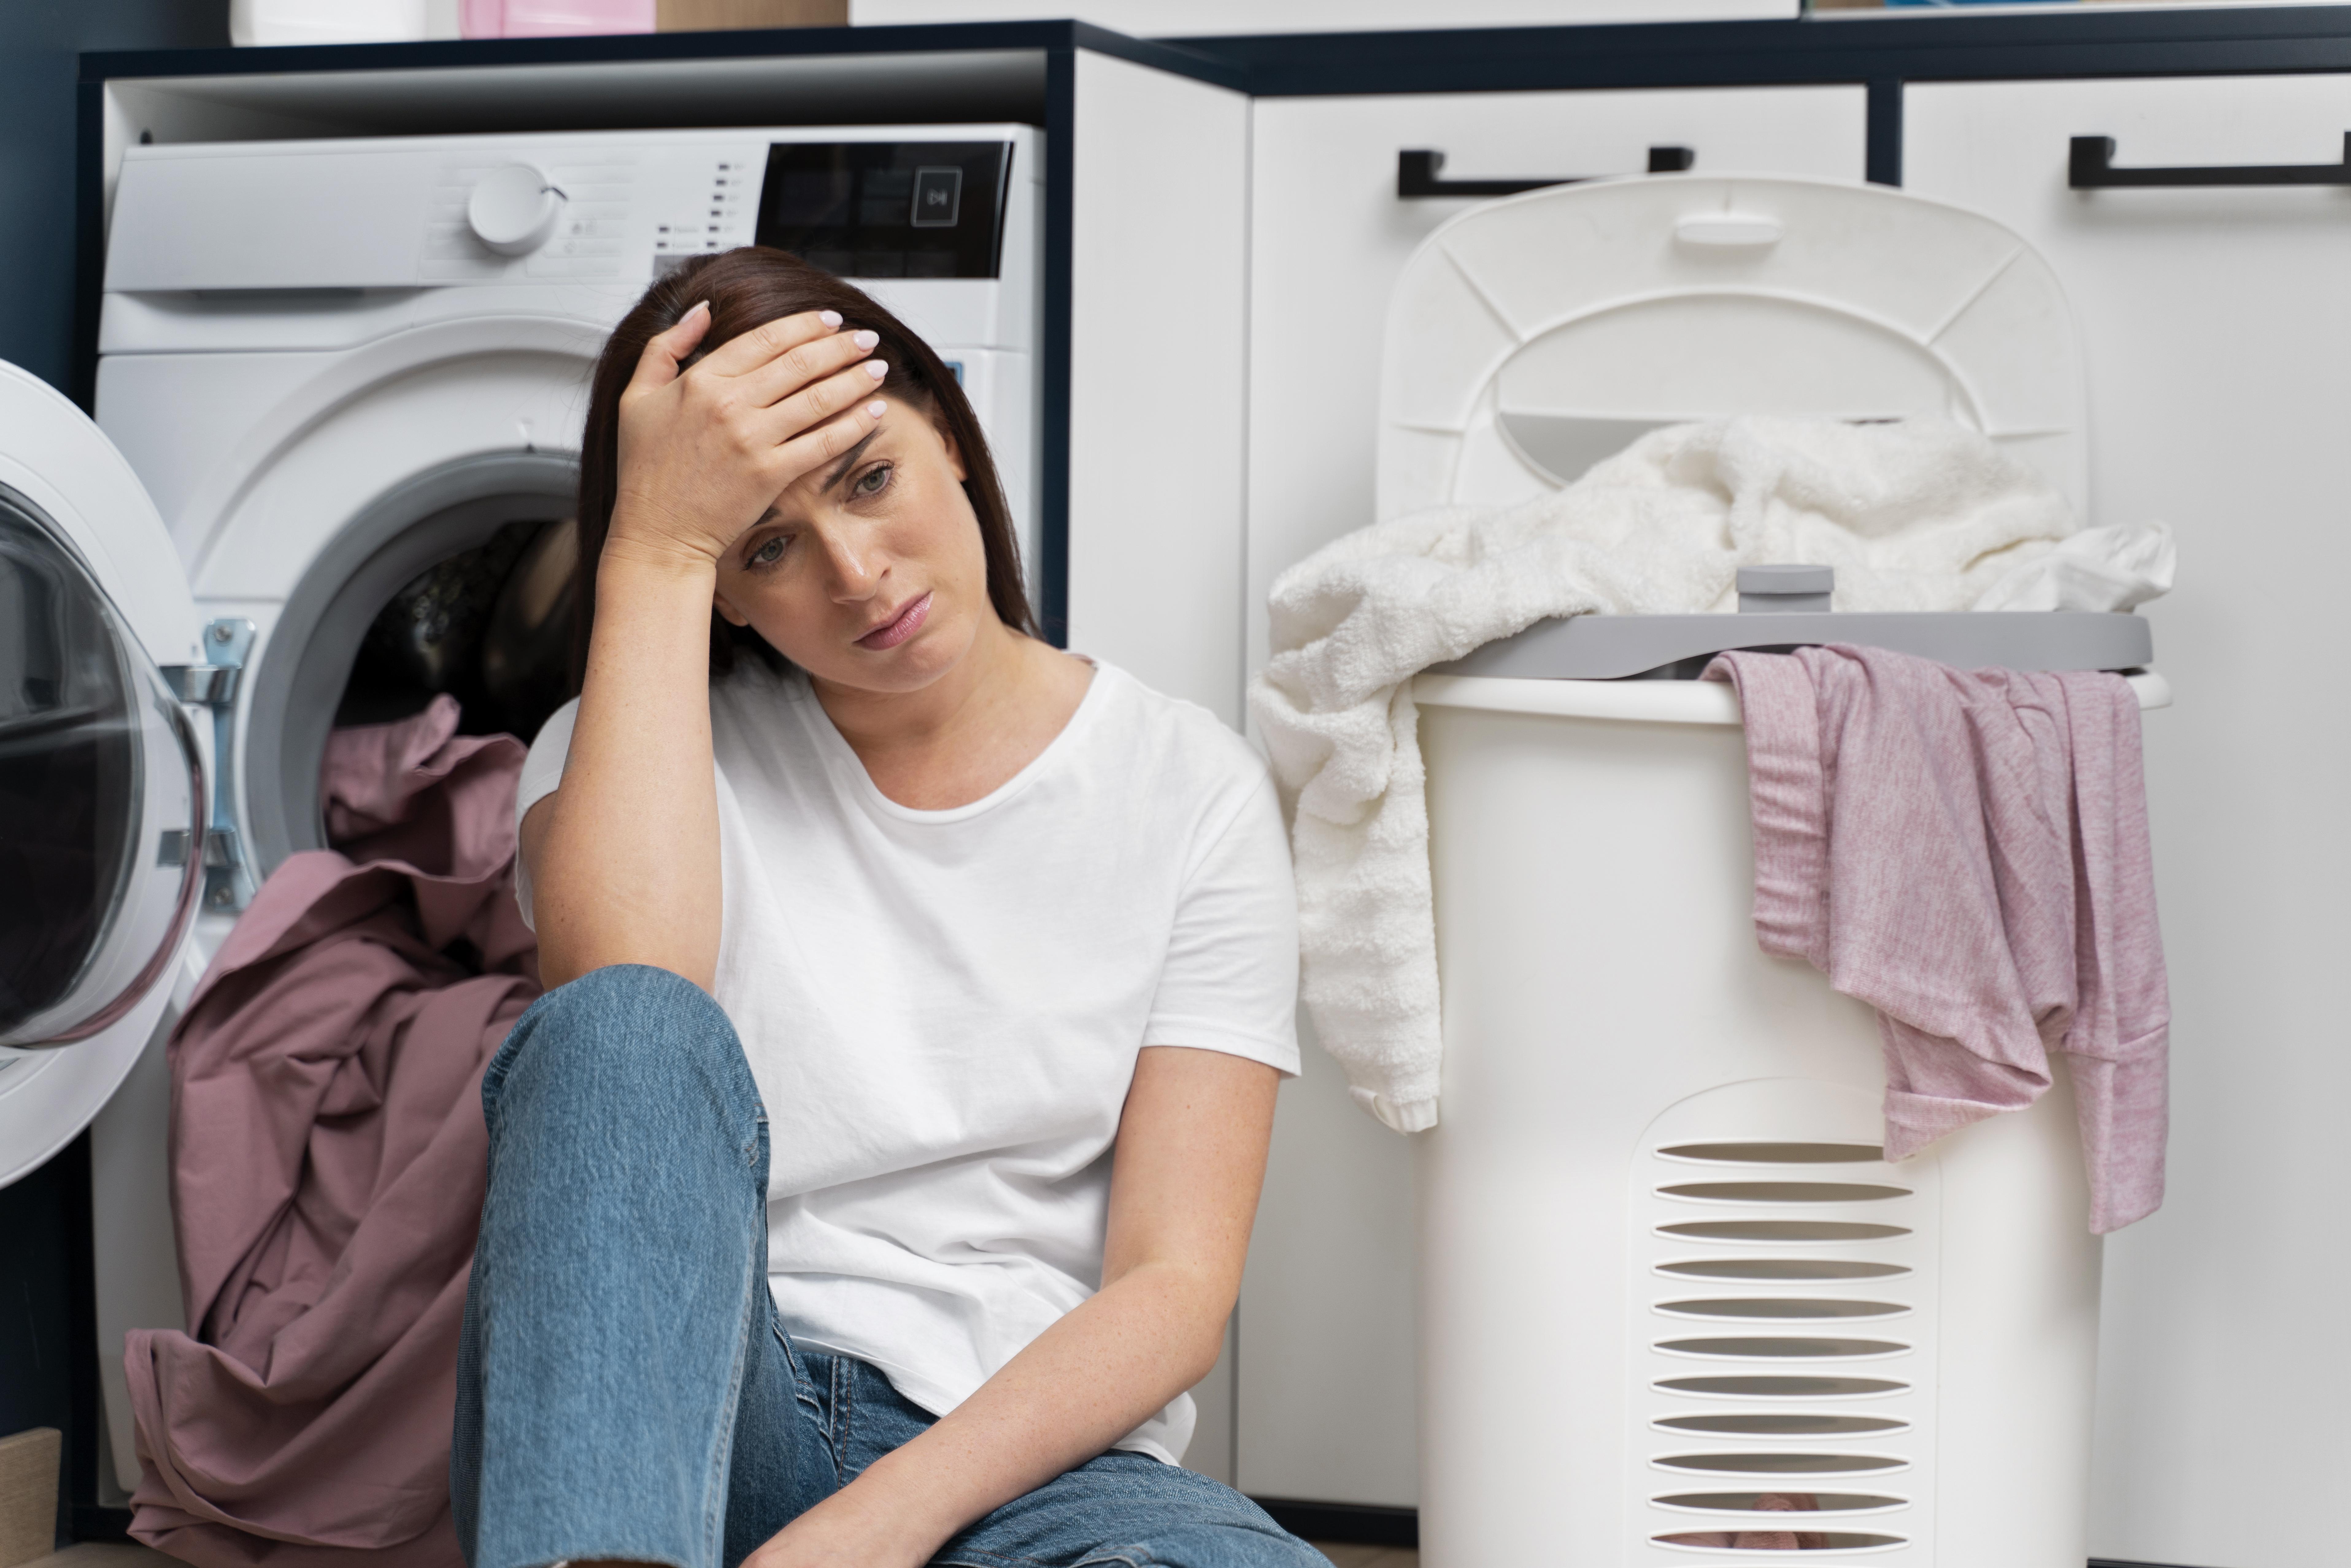 Woman looking upset as she's leans on a washing machine, surrounded by laundry | Source: Freepik